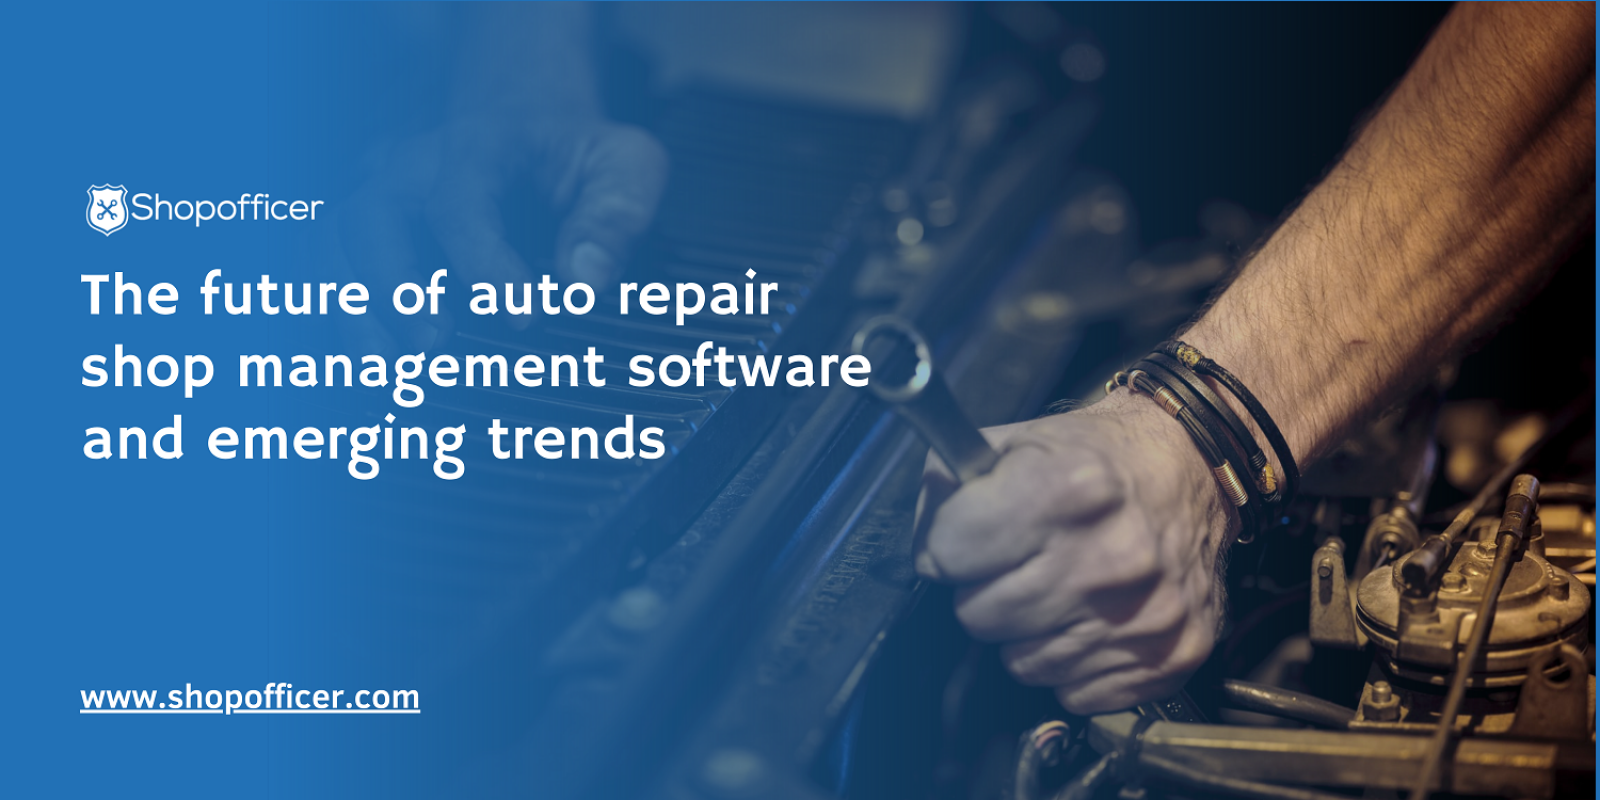 The future of auto repair shop management software and emerging trends